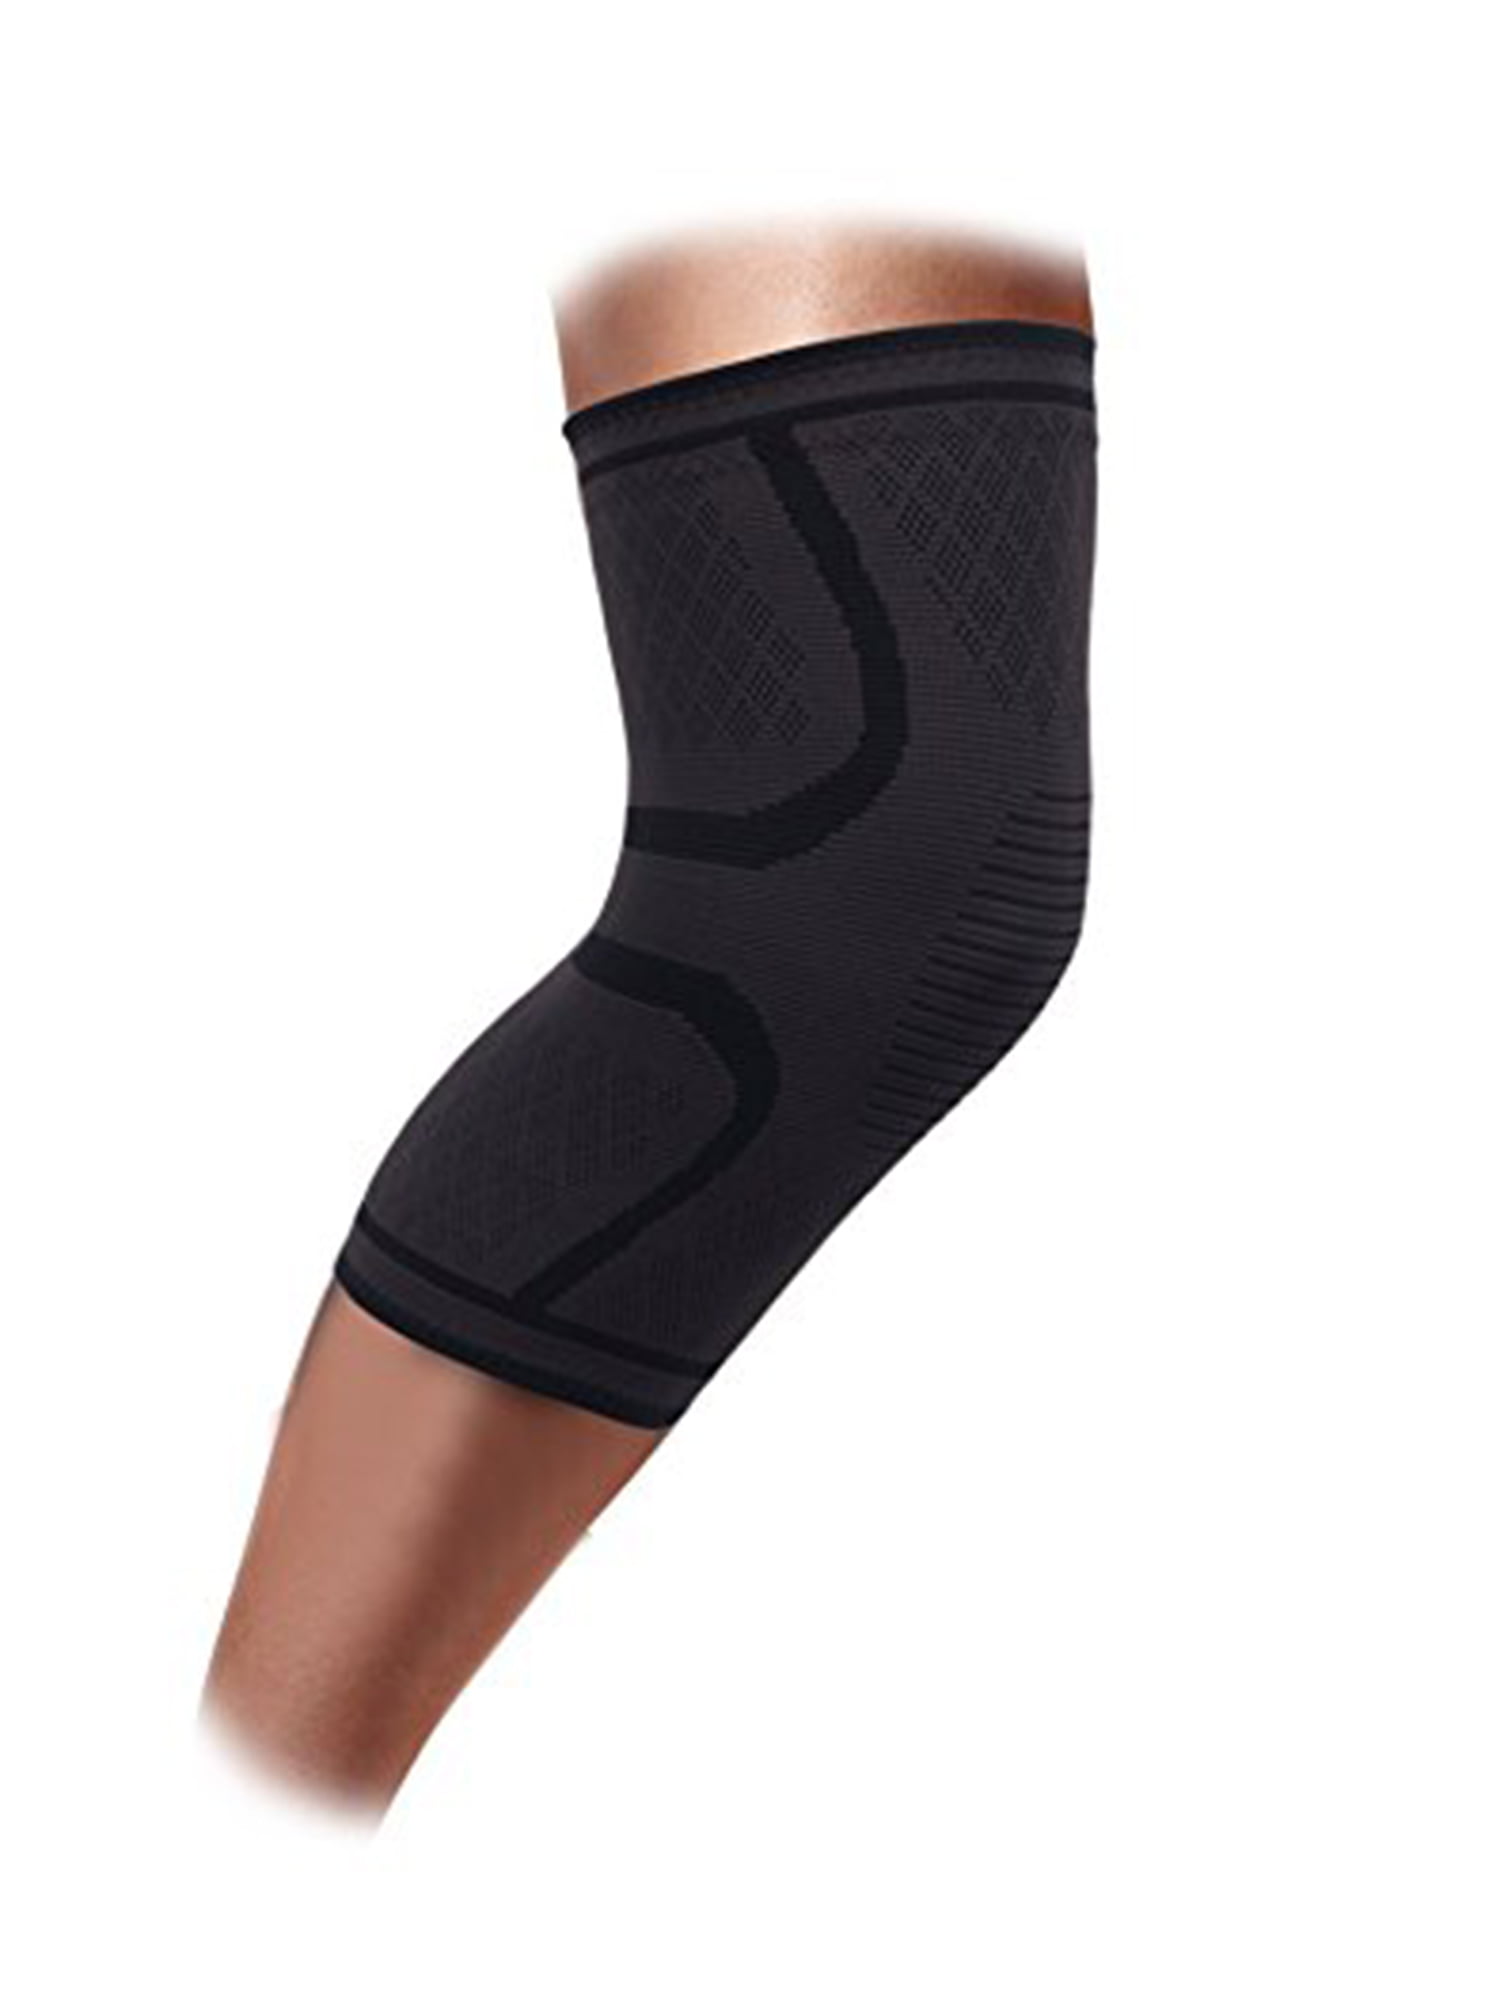 Adjustable Knee Pad Brace Extend Support Leg Sleeve Protector Fitness Sports A13 